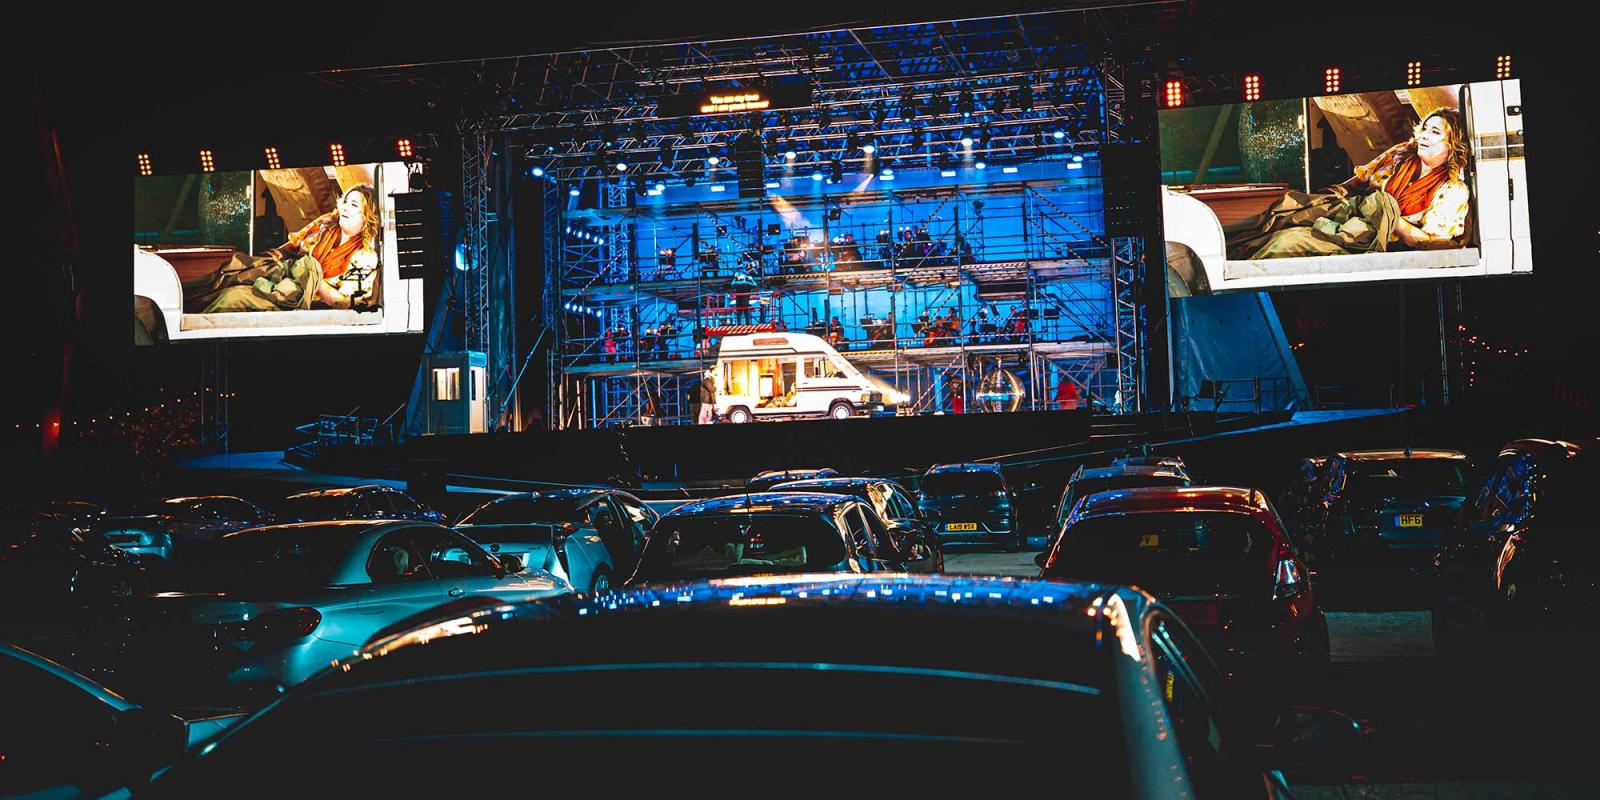 The Drive & Live car park and stage, showing Mimi on screens flanking the stage.